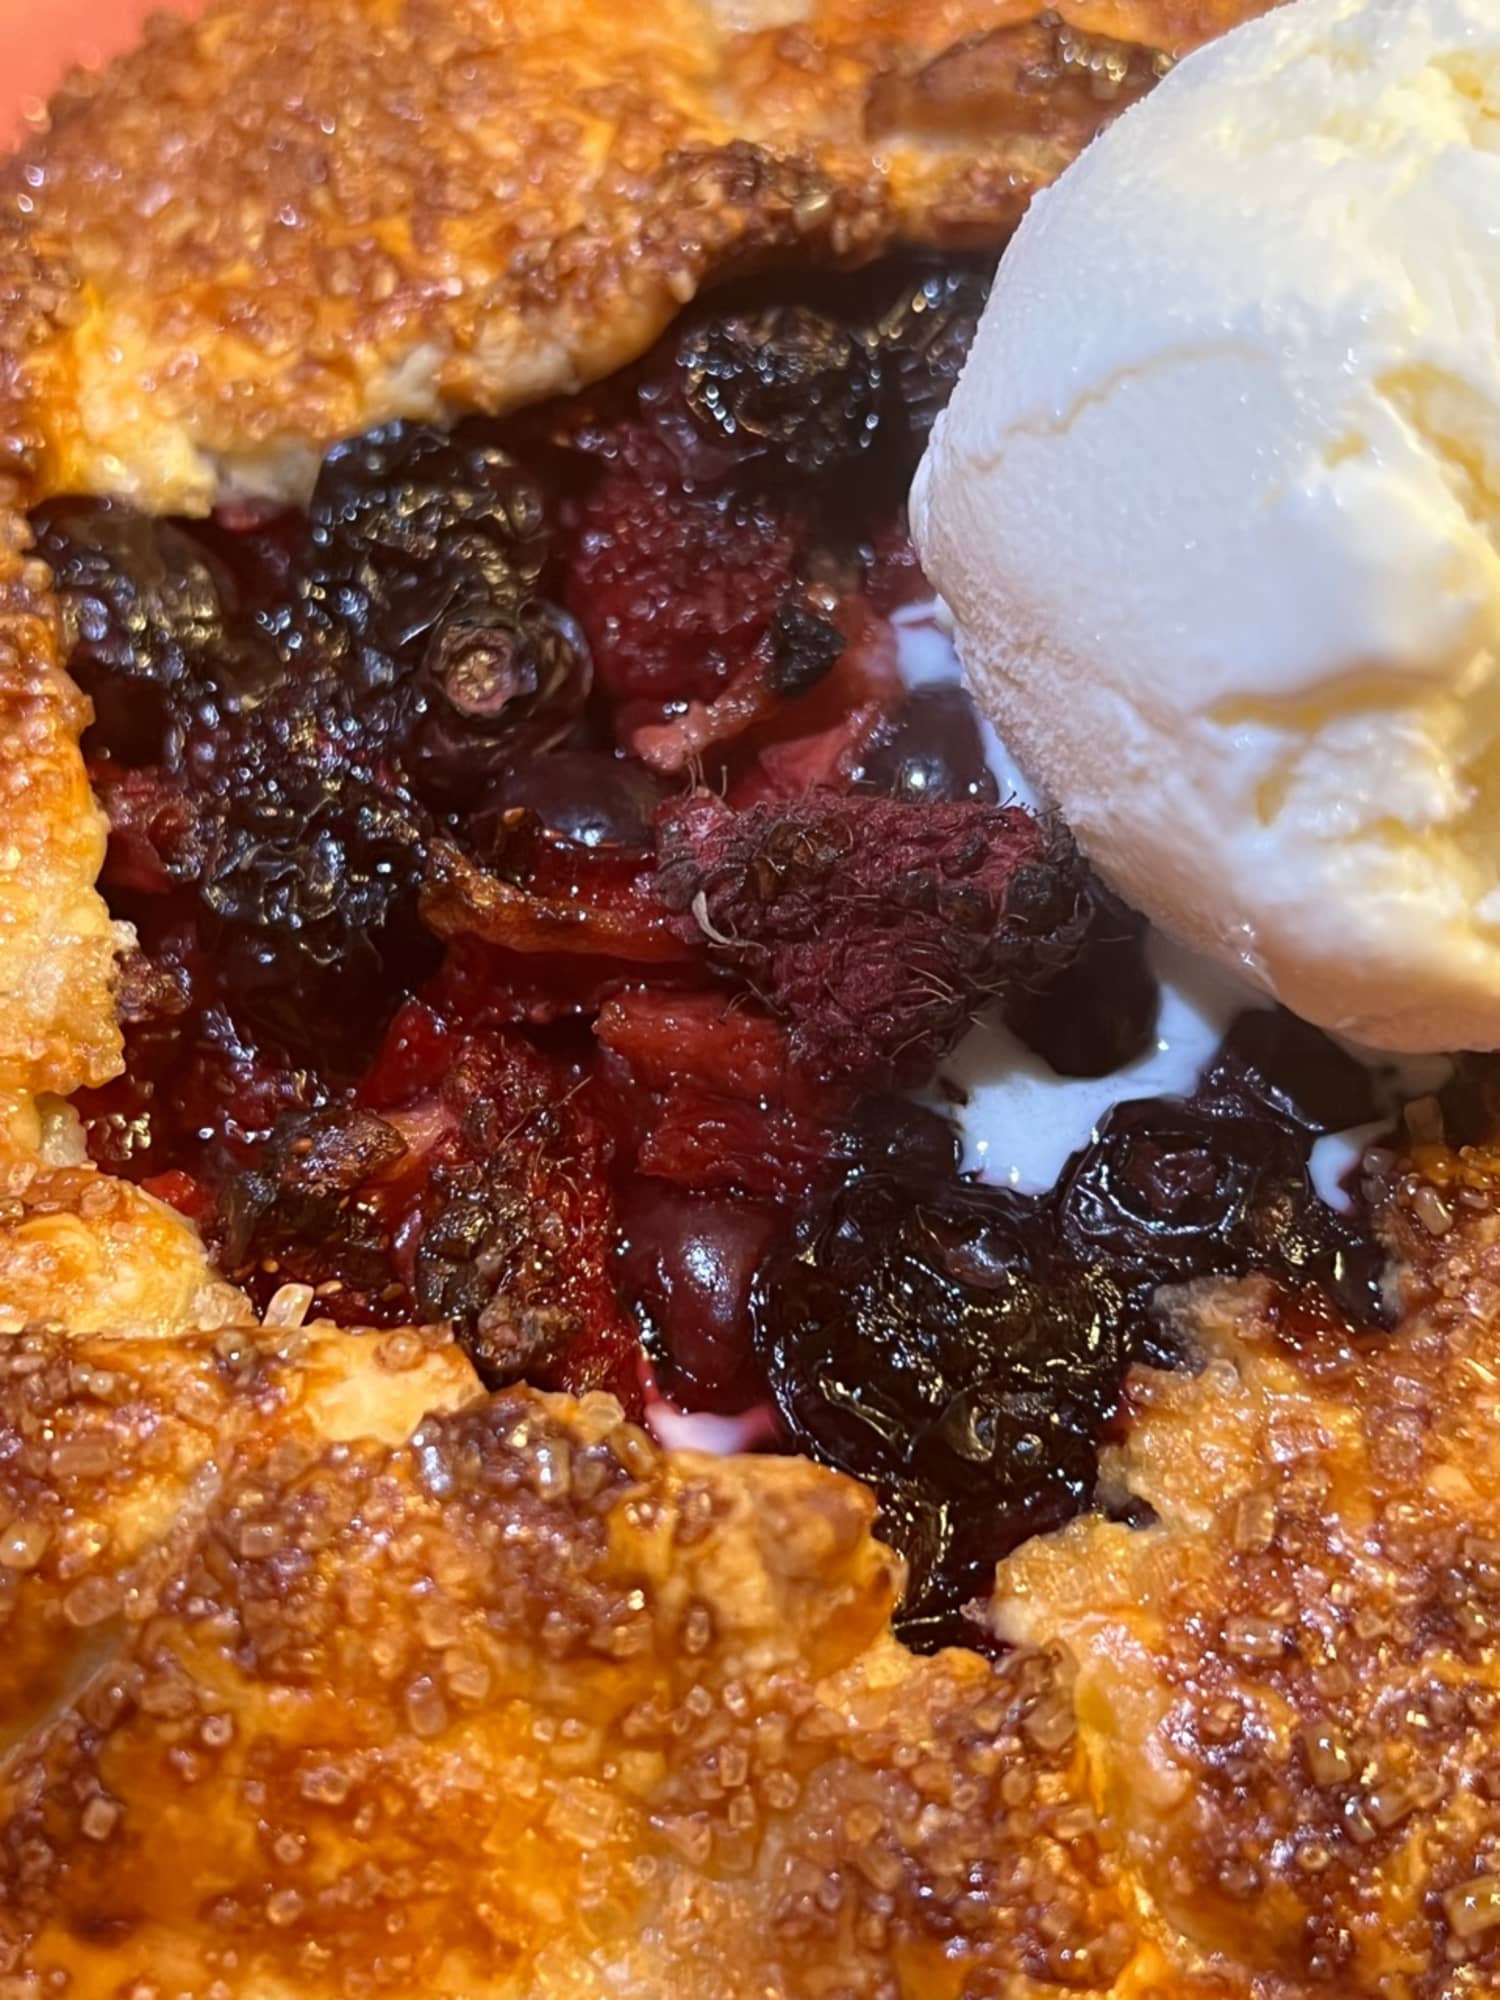 I Tried This Single-Serve Version of Berry Crostata and It’s the One Recipe I Wish I’d Known About Sooner